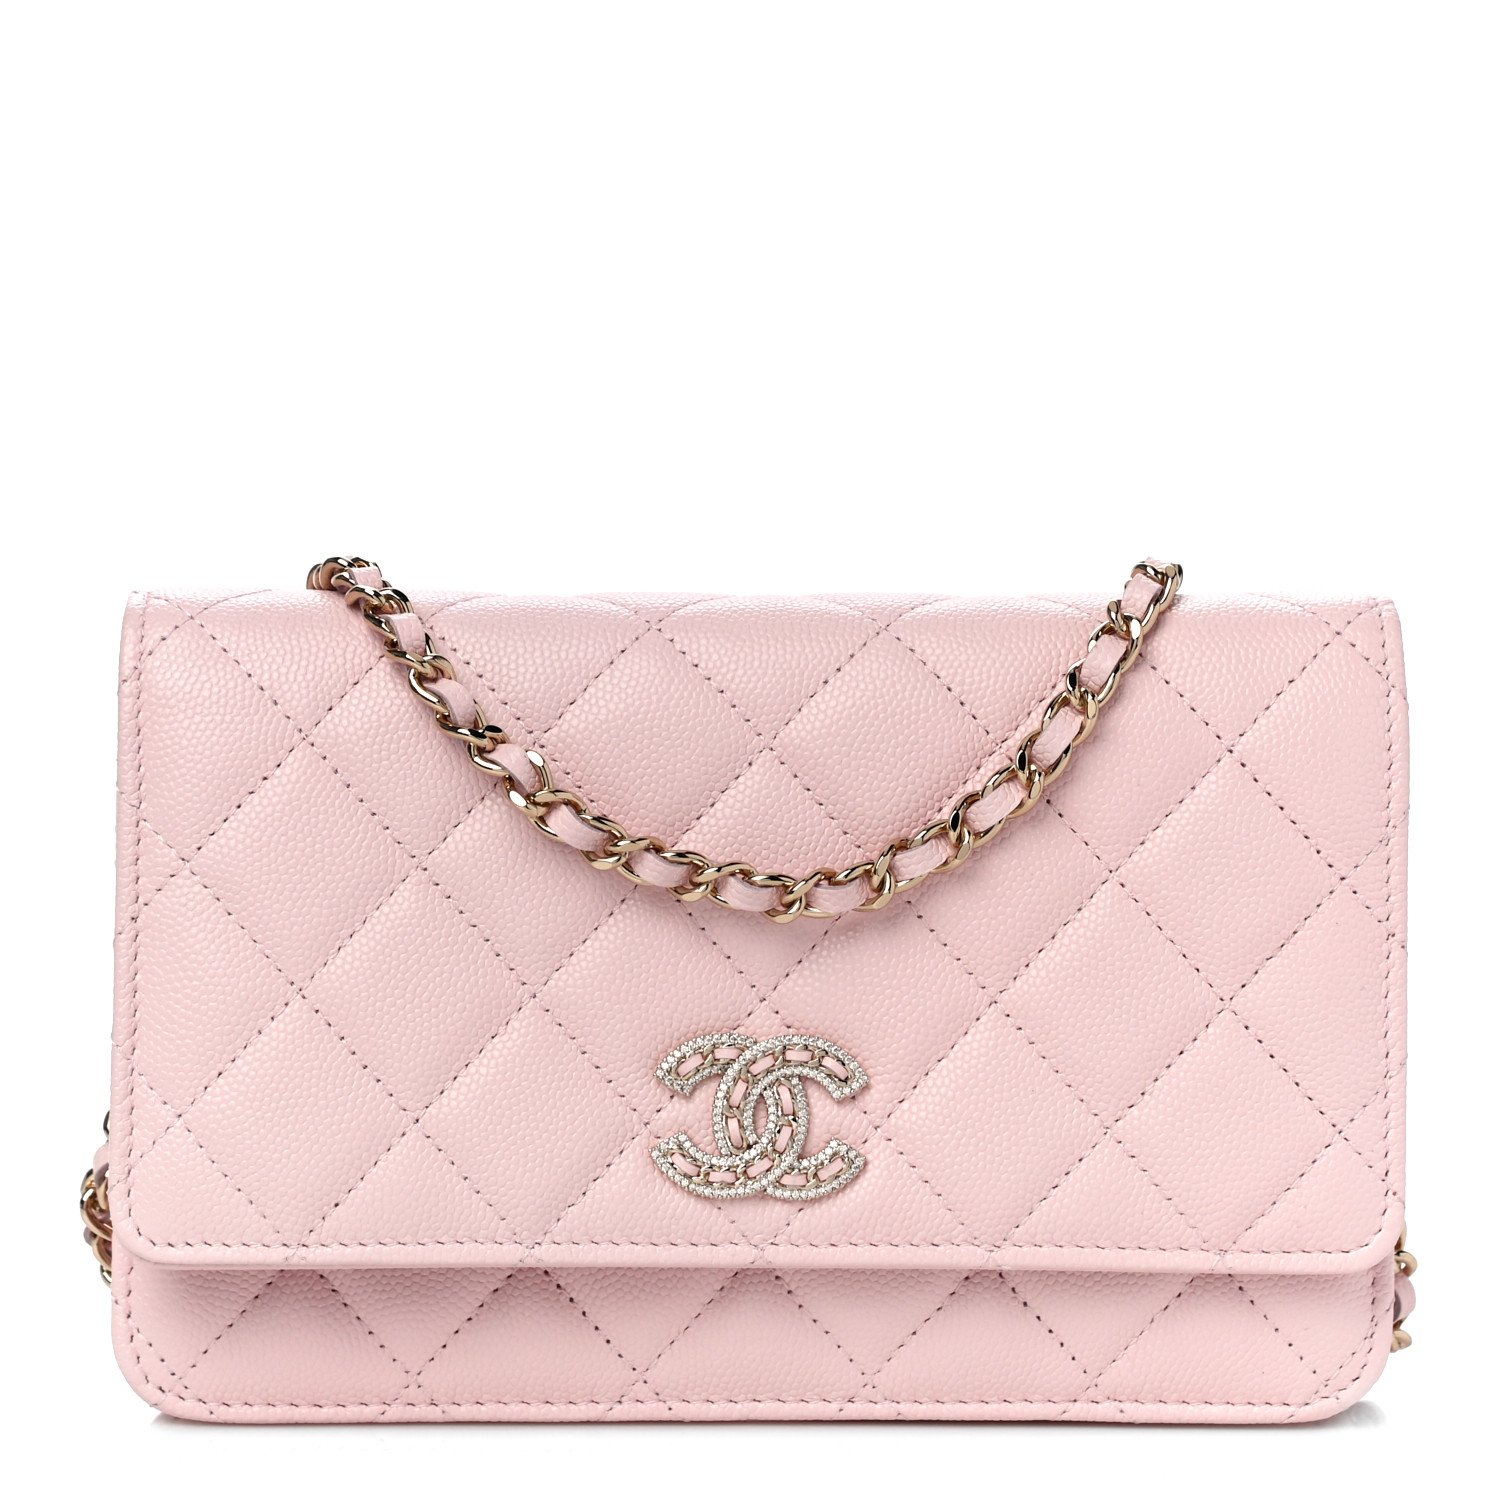 Chanel Wallet on Chain with Crystal Logo in Light Pink Caviar.jpg